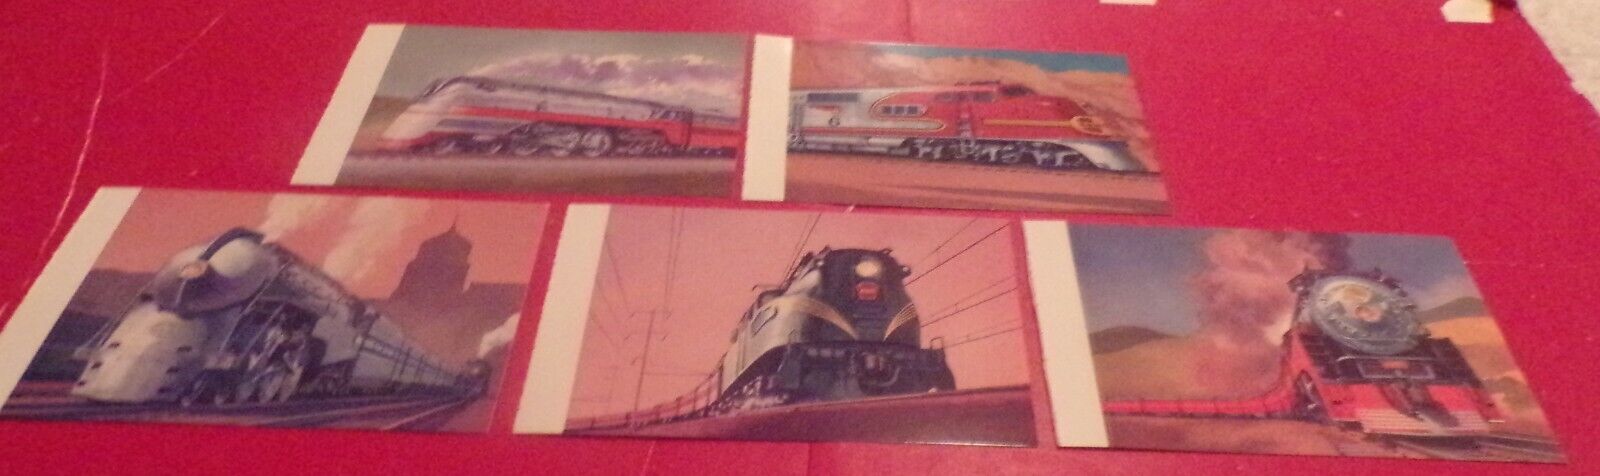 USPS Postal Cards UX 307-311 Trains San Antonio Mall Ranking integrated 1st place Century 20th